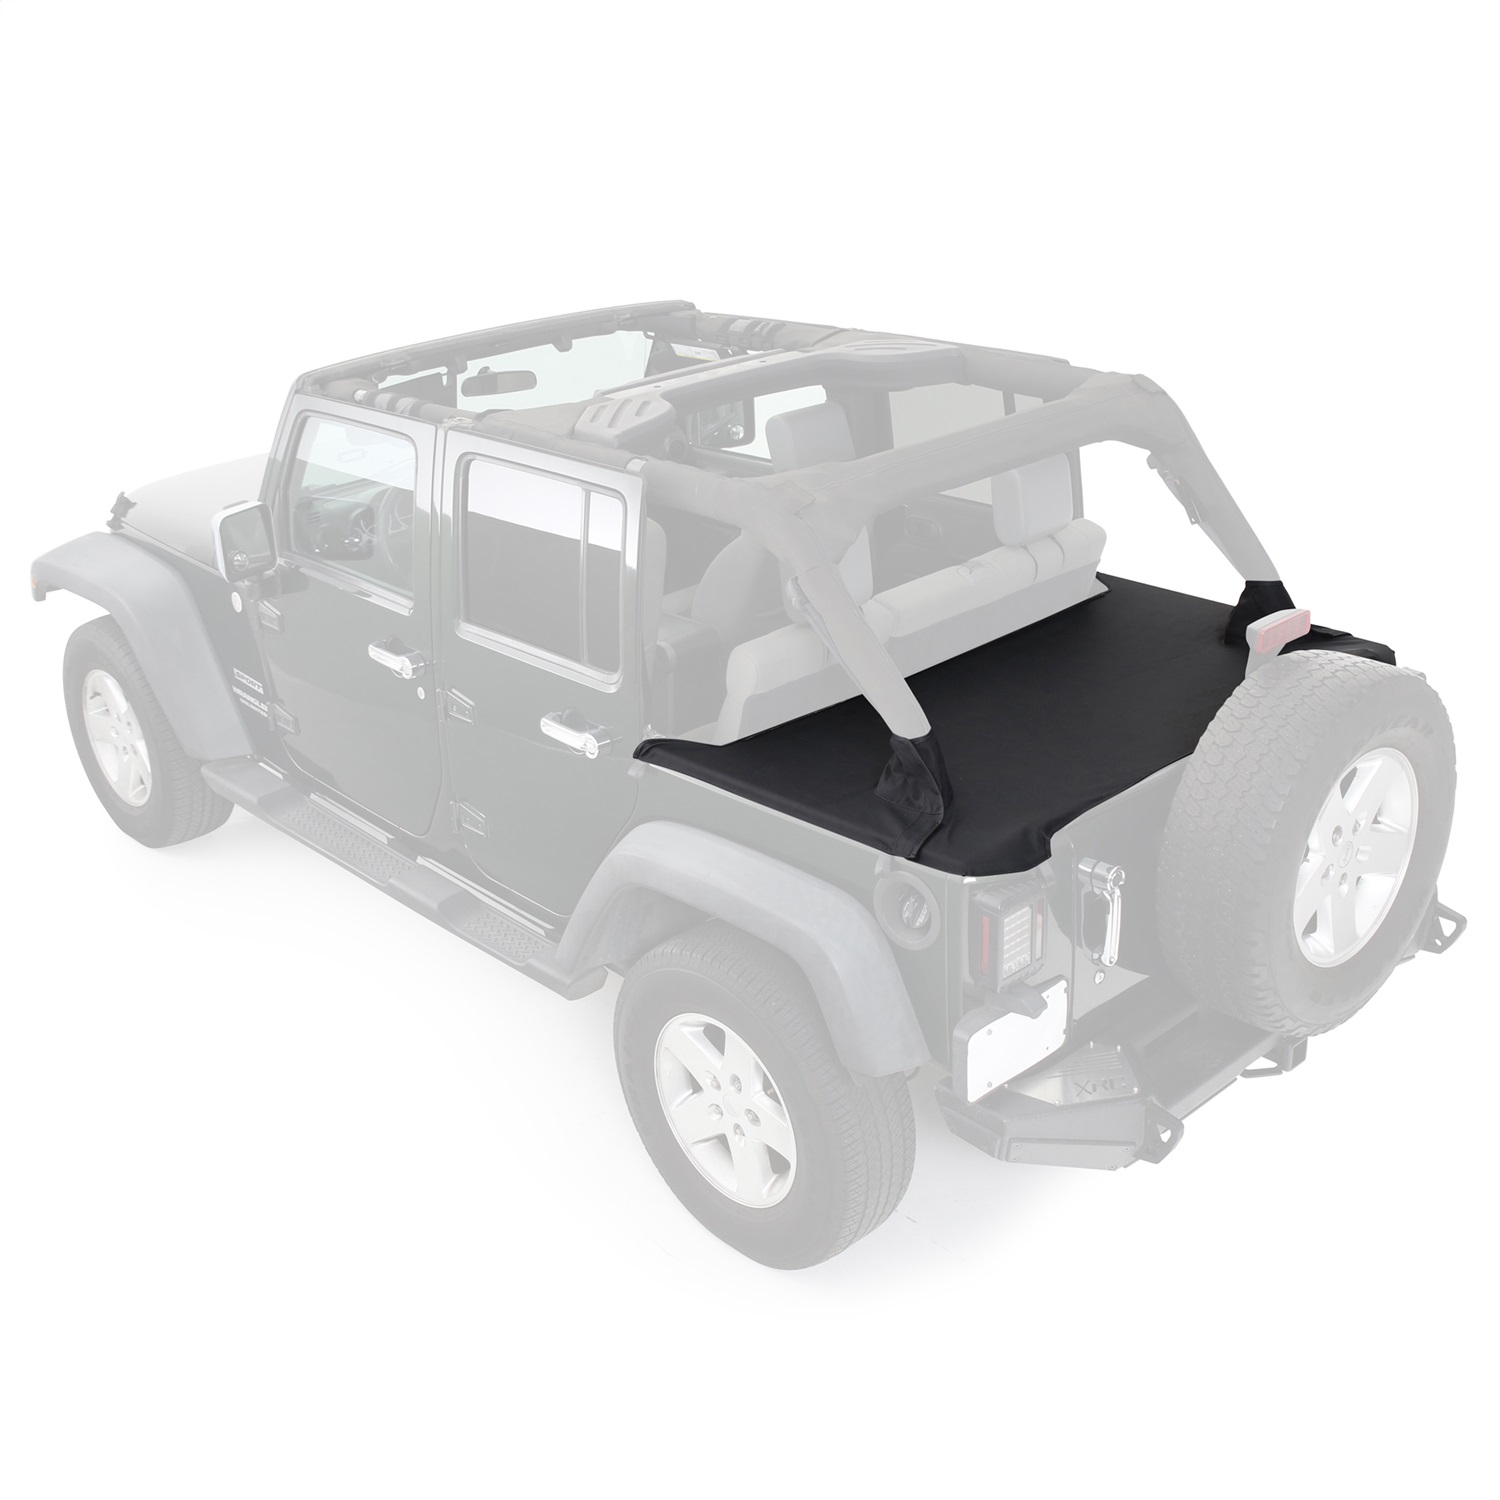 761335 Smittybilt Duster Deck Cover Covers Rear Cargo Area